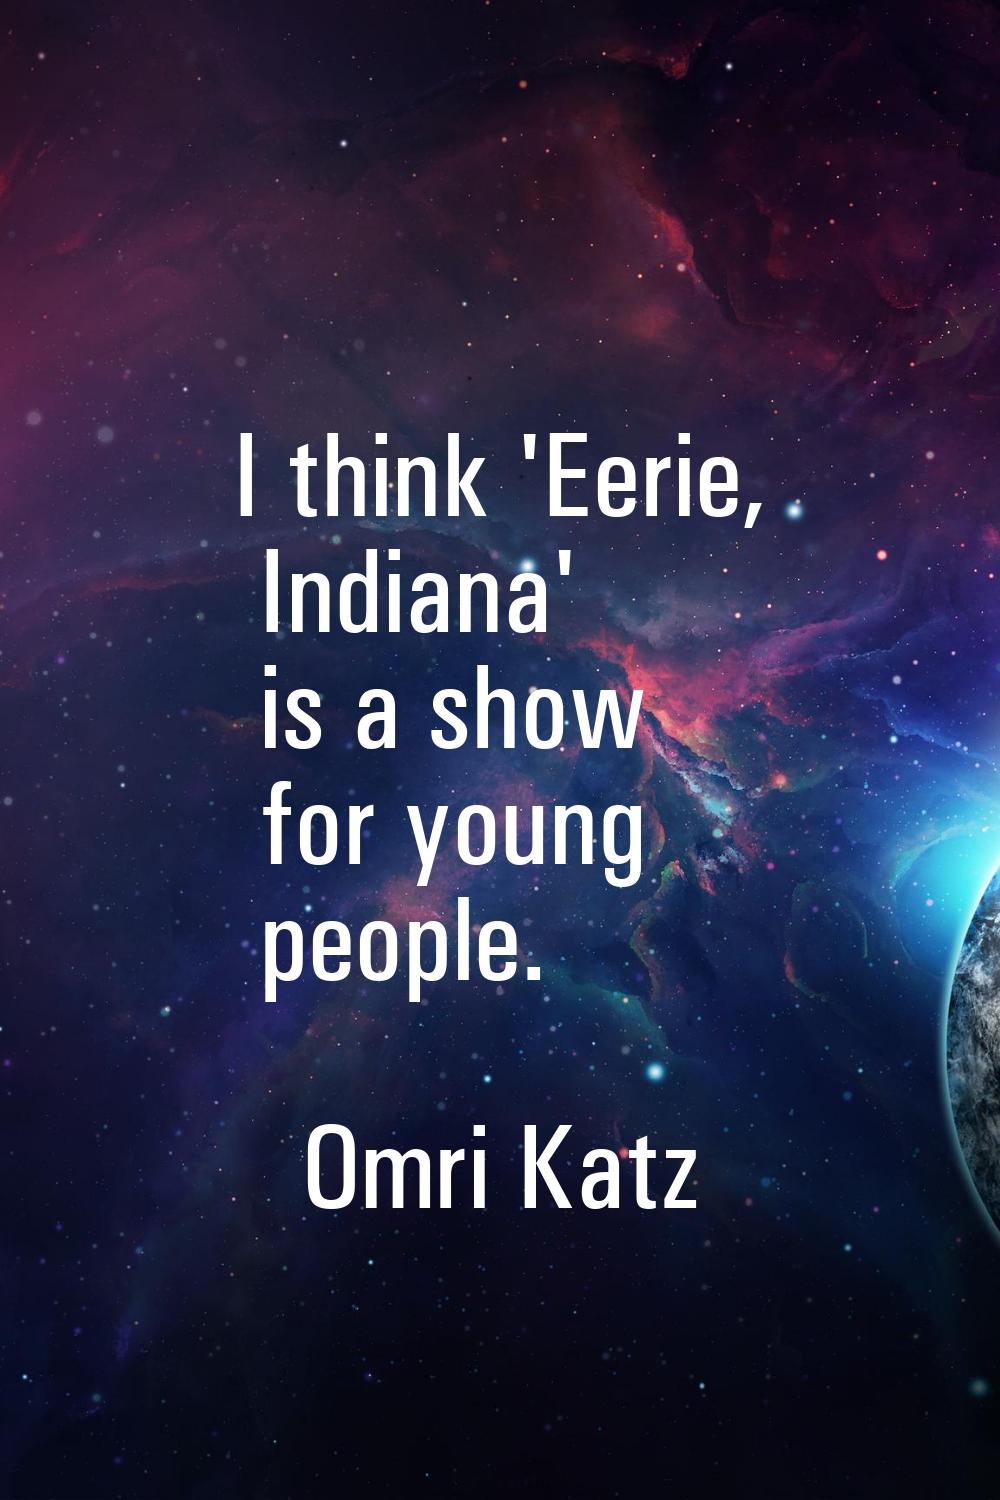 I think 'Eerie, Indiana' is a show for young people.